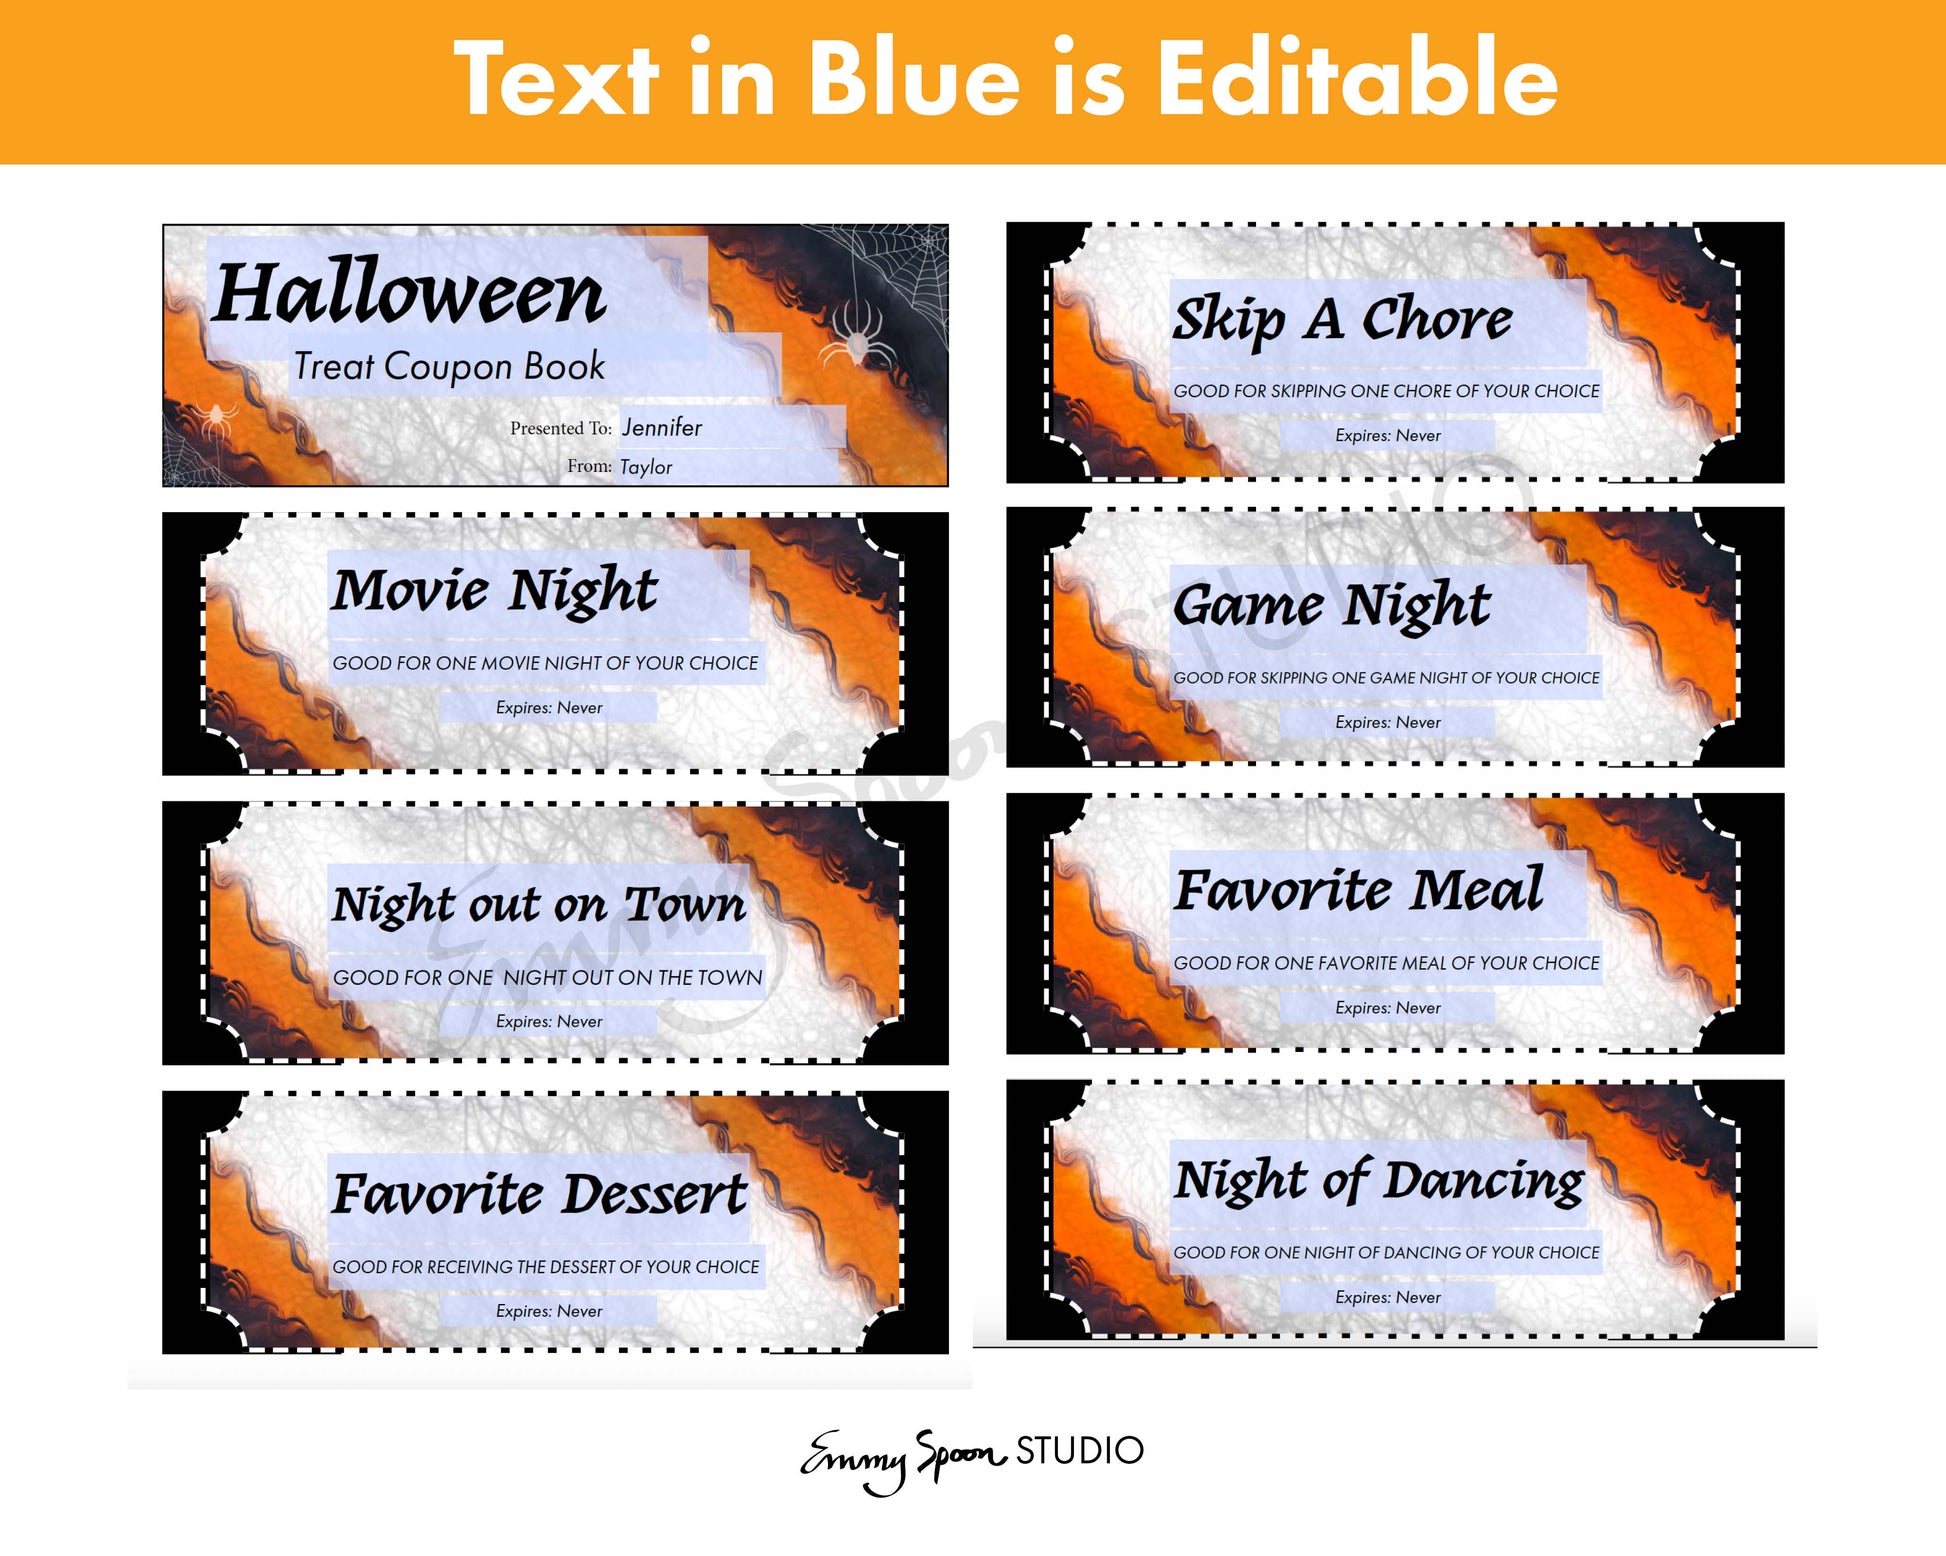 Text in Blue is Editable by Emmy Spoon Studio